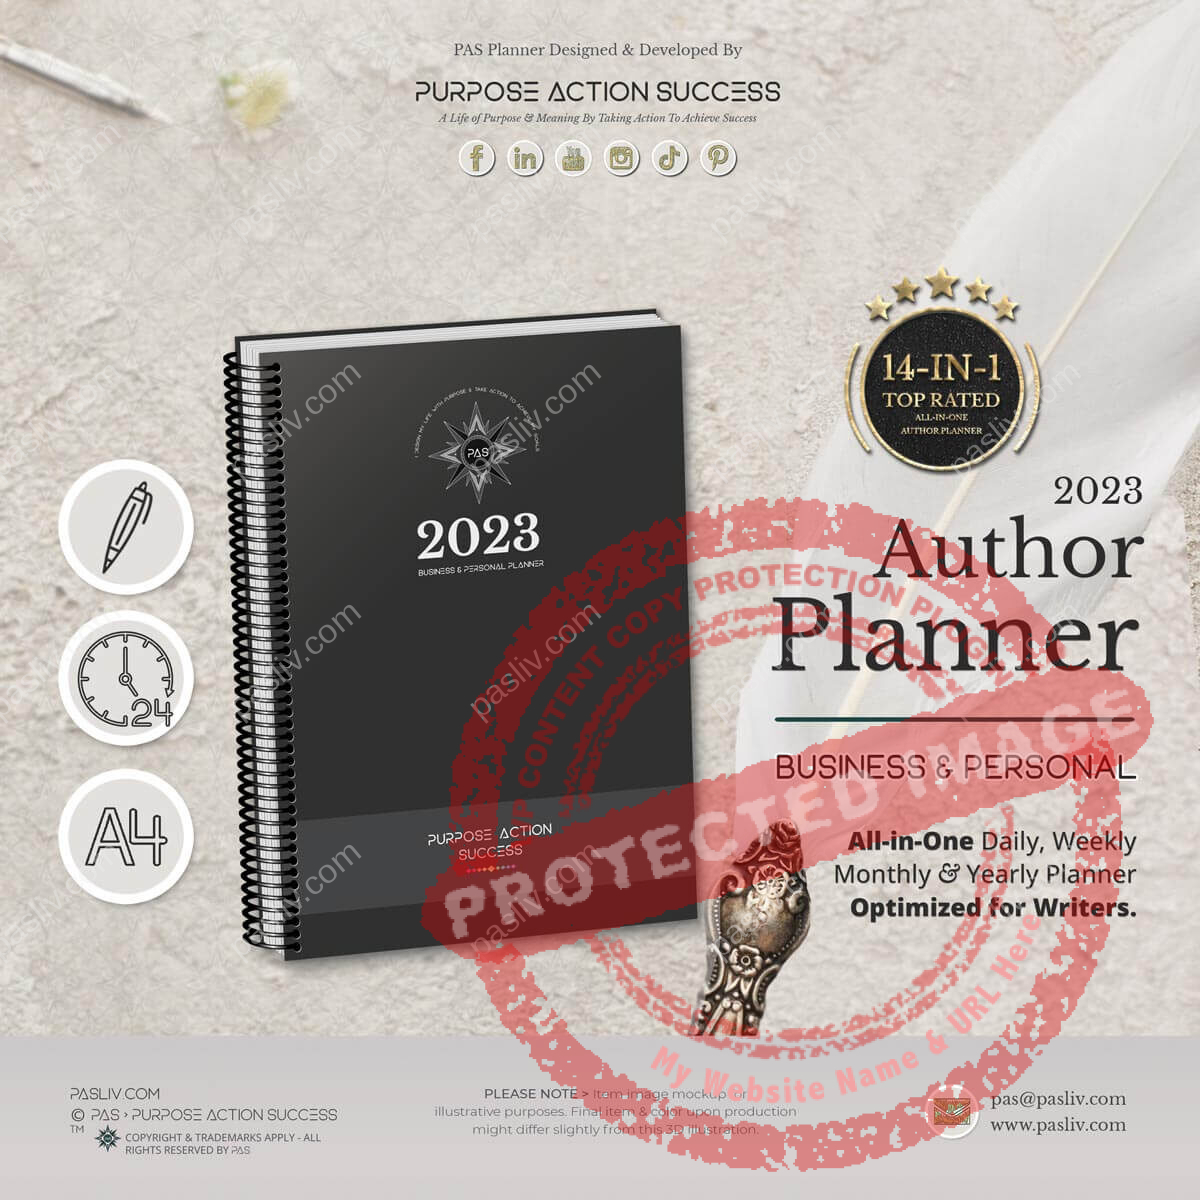 PAS Author Planner 2023 Diary Grey Andromedah Cover - Copyright & Trademarks Apply - All Rights Reserved by PAS > Purpose Action Success.